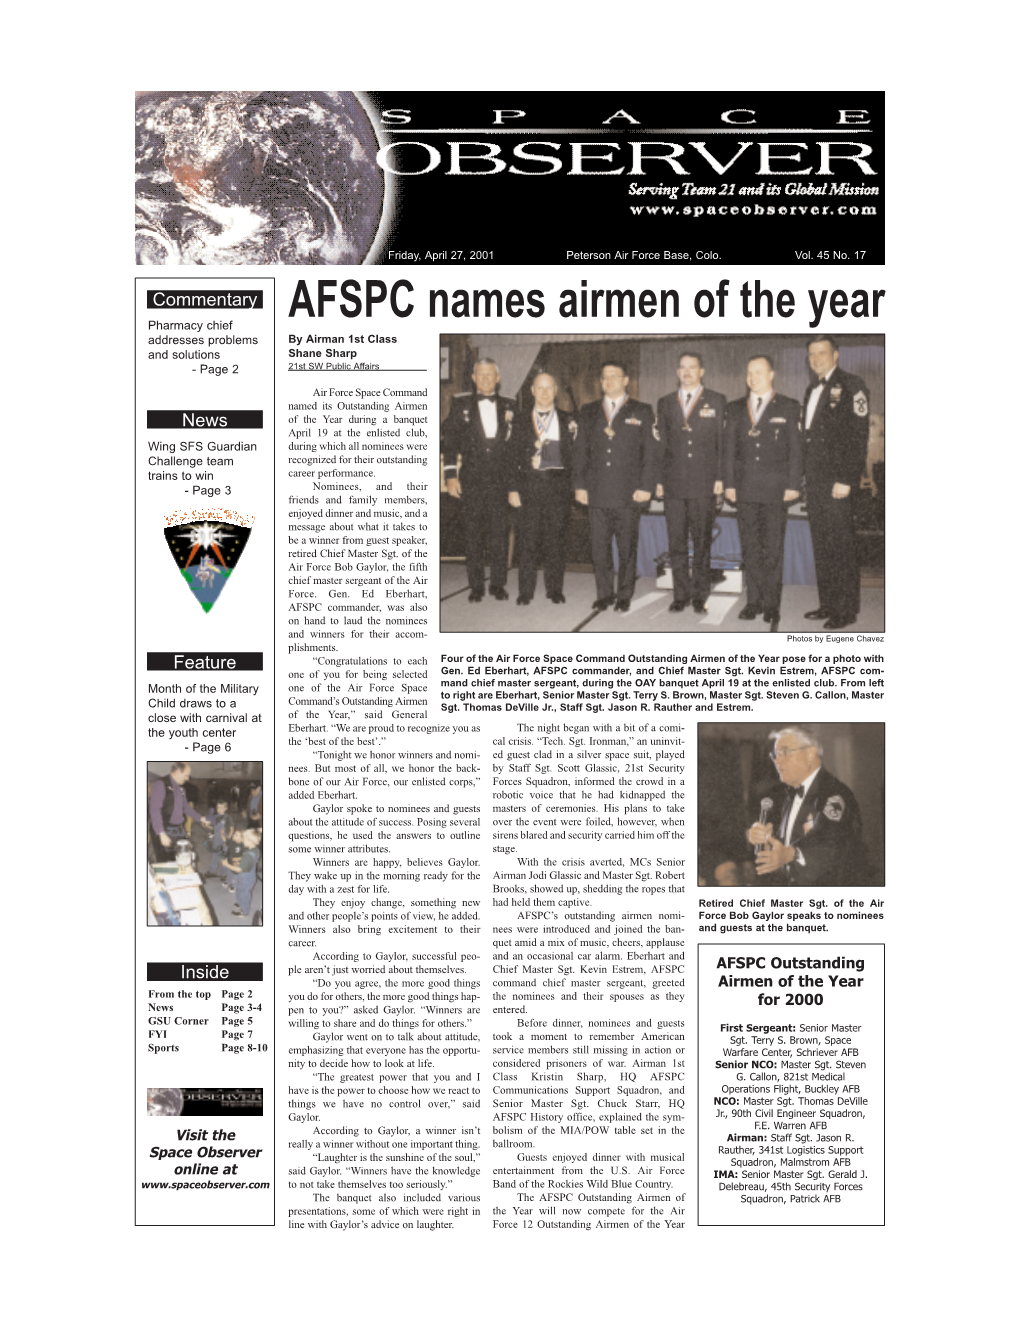 AFSPC Names Airmen of the Year Pharmacy Chief Addresses Problems by Airman 1St Class and Solutions Shane Sharp - Page 2 21St SW Public Affairs